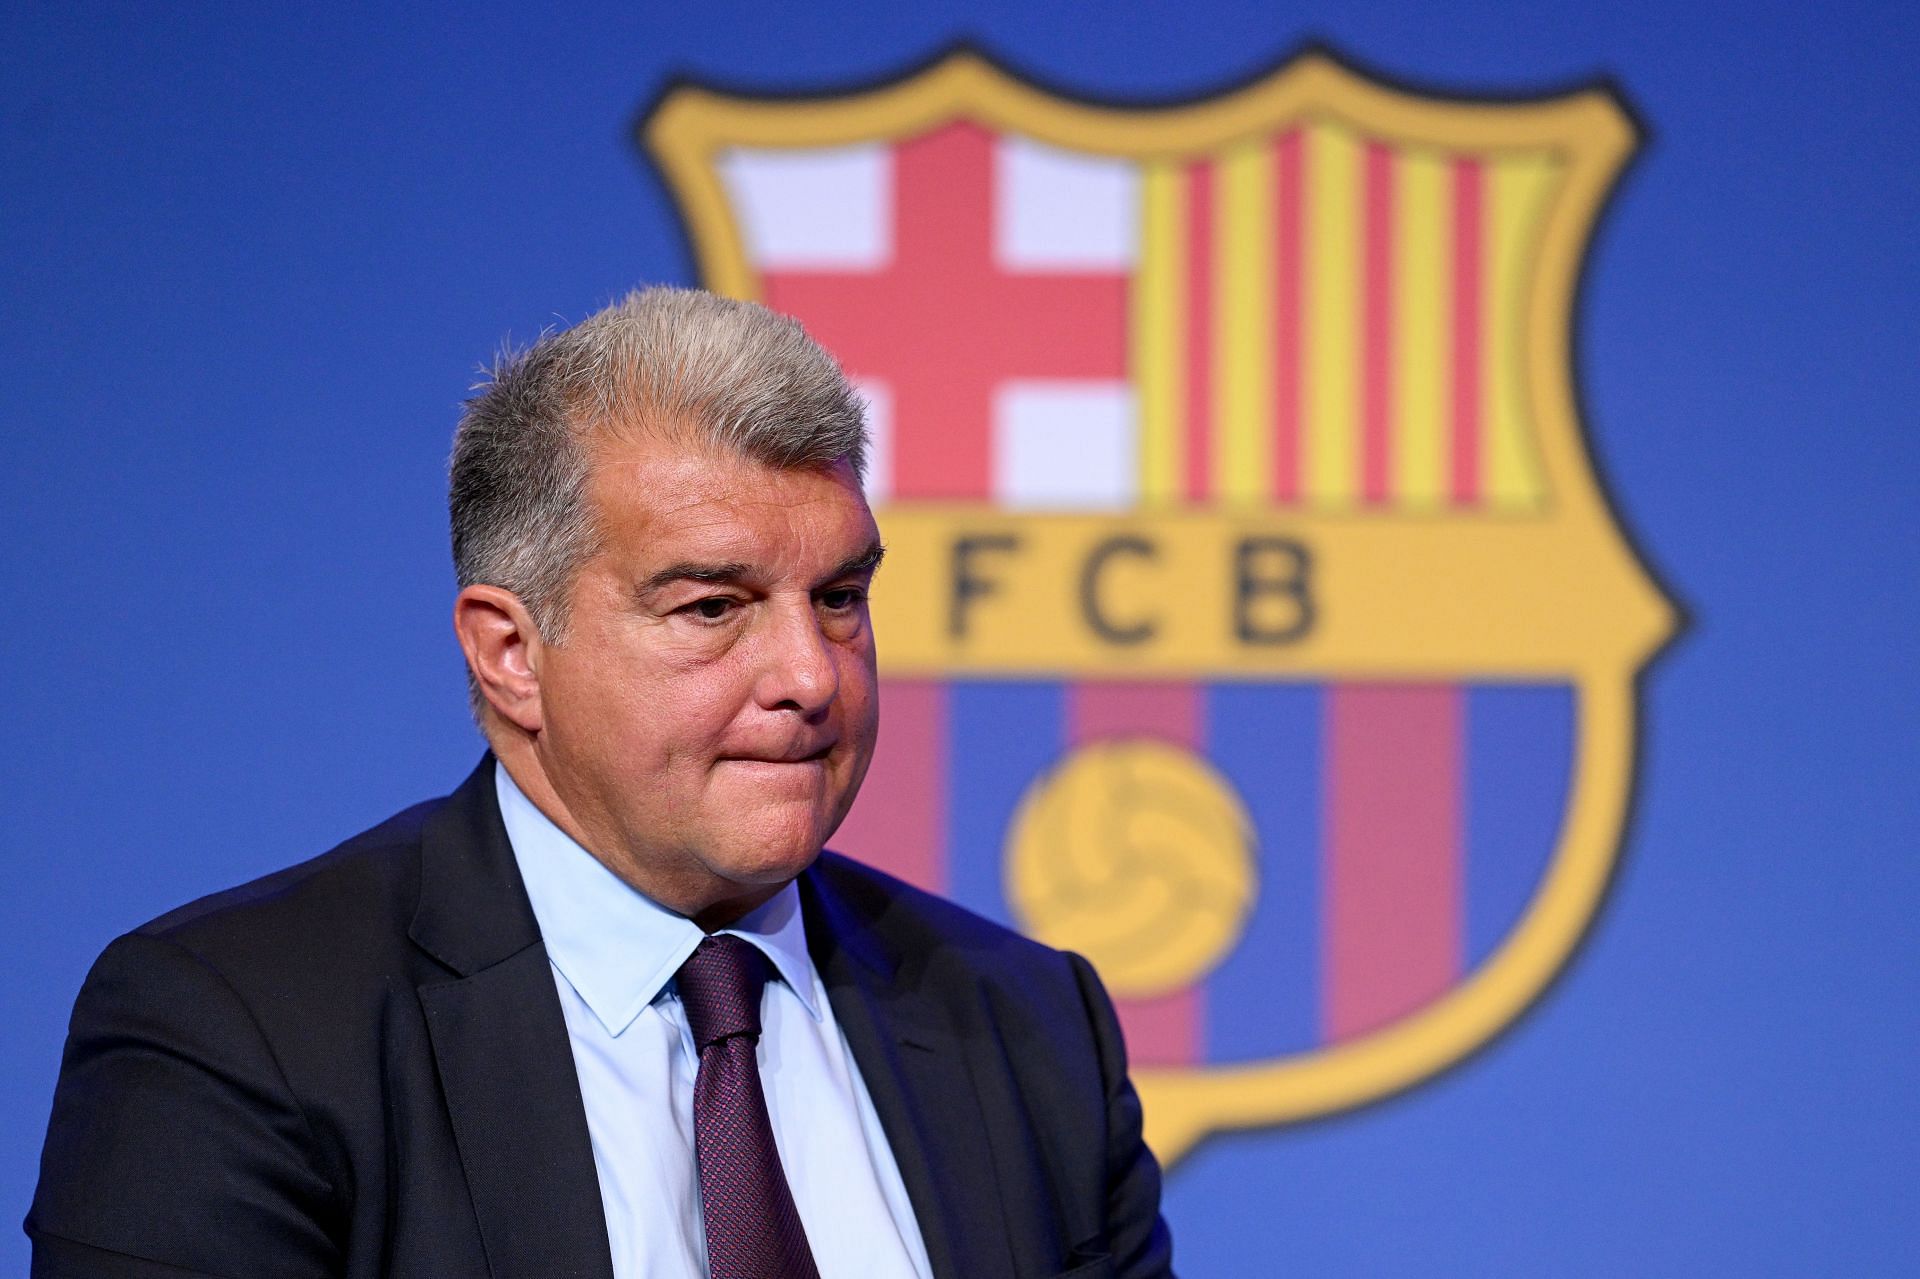 Barcelona will not be able to sign any new players without prior sales if top target joins this summer - Reports